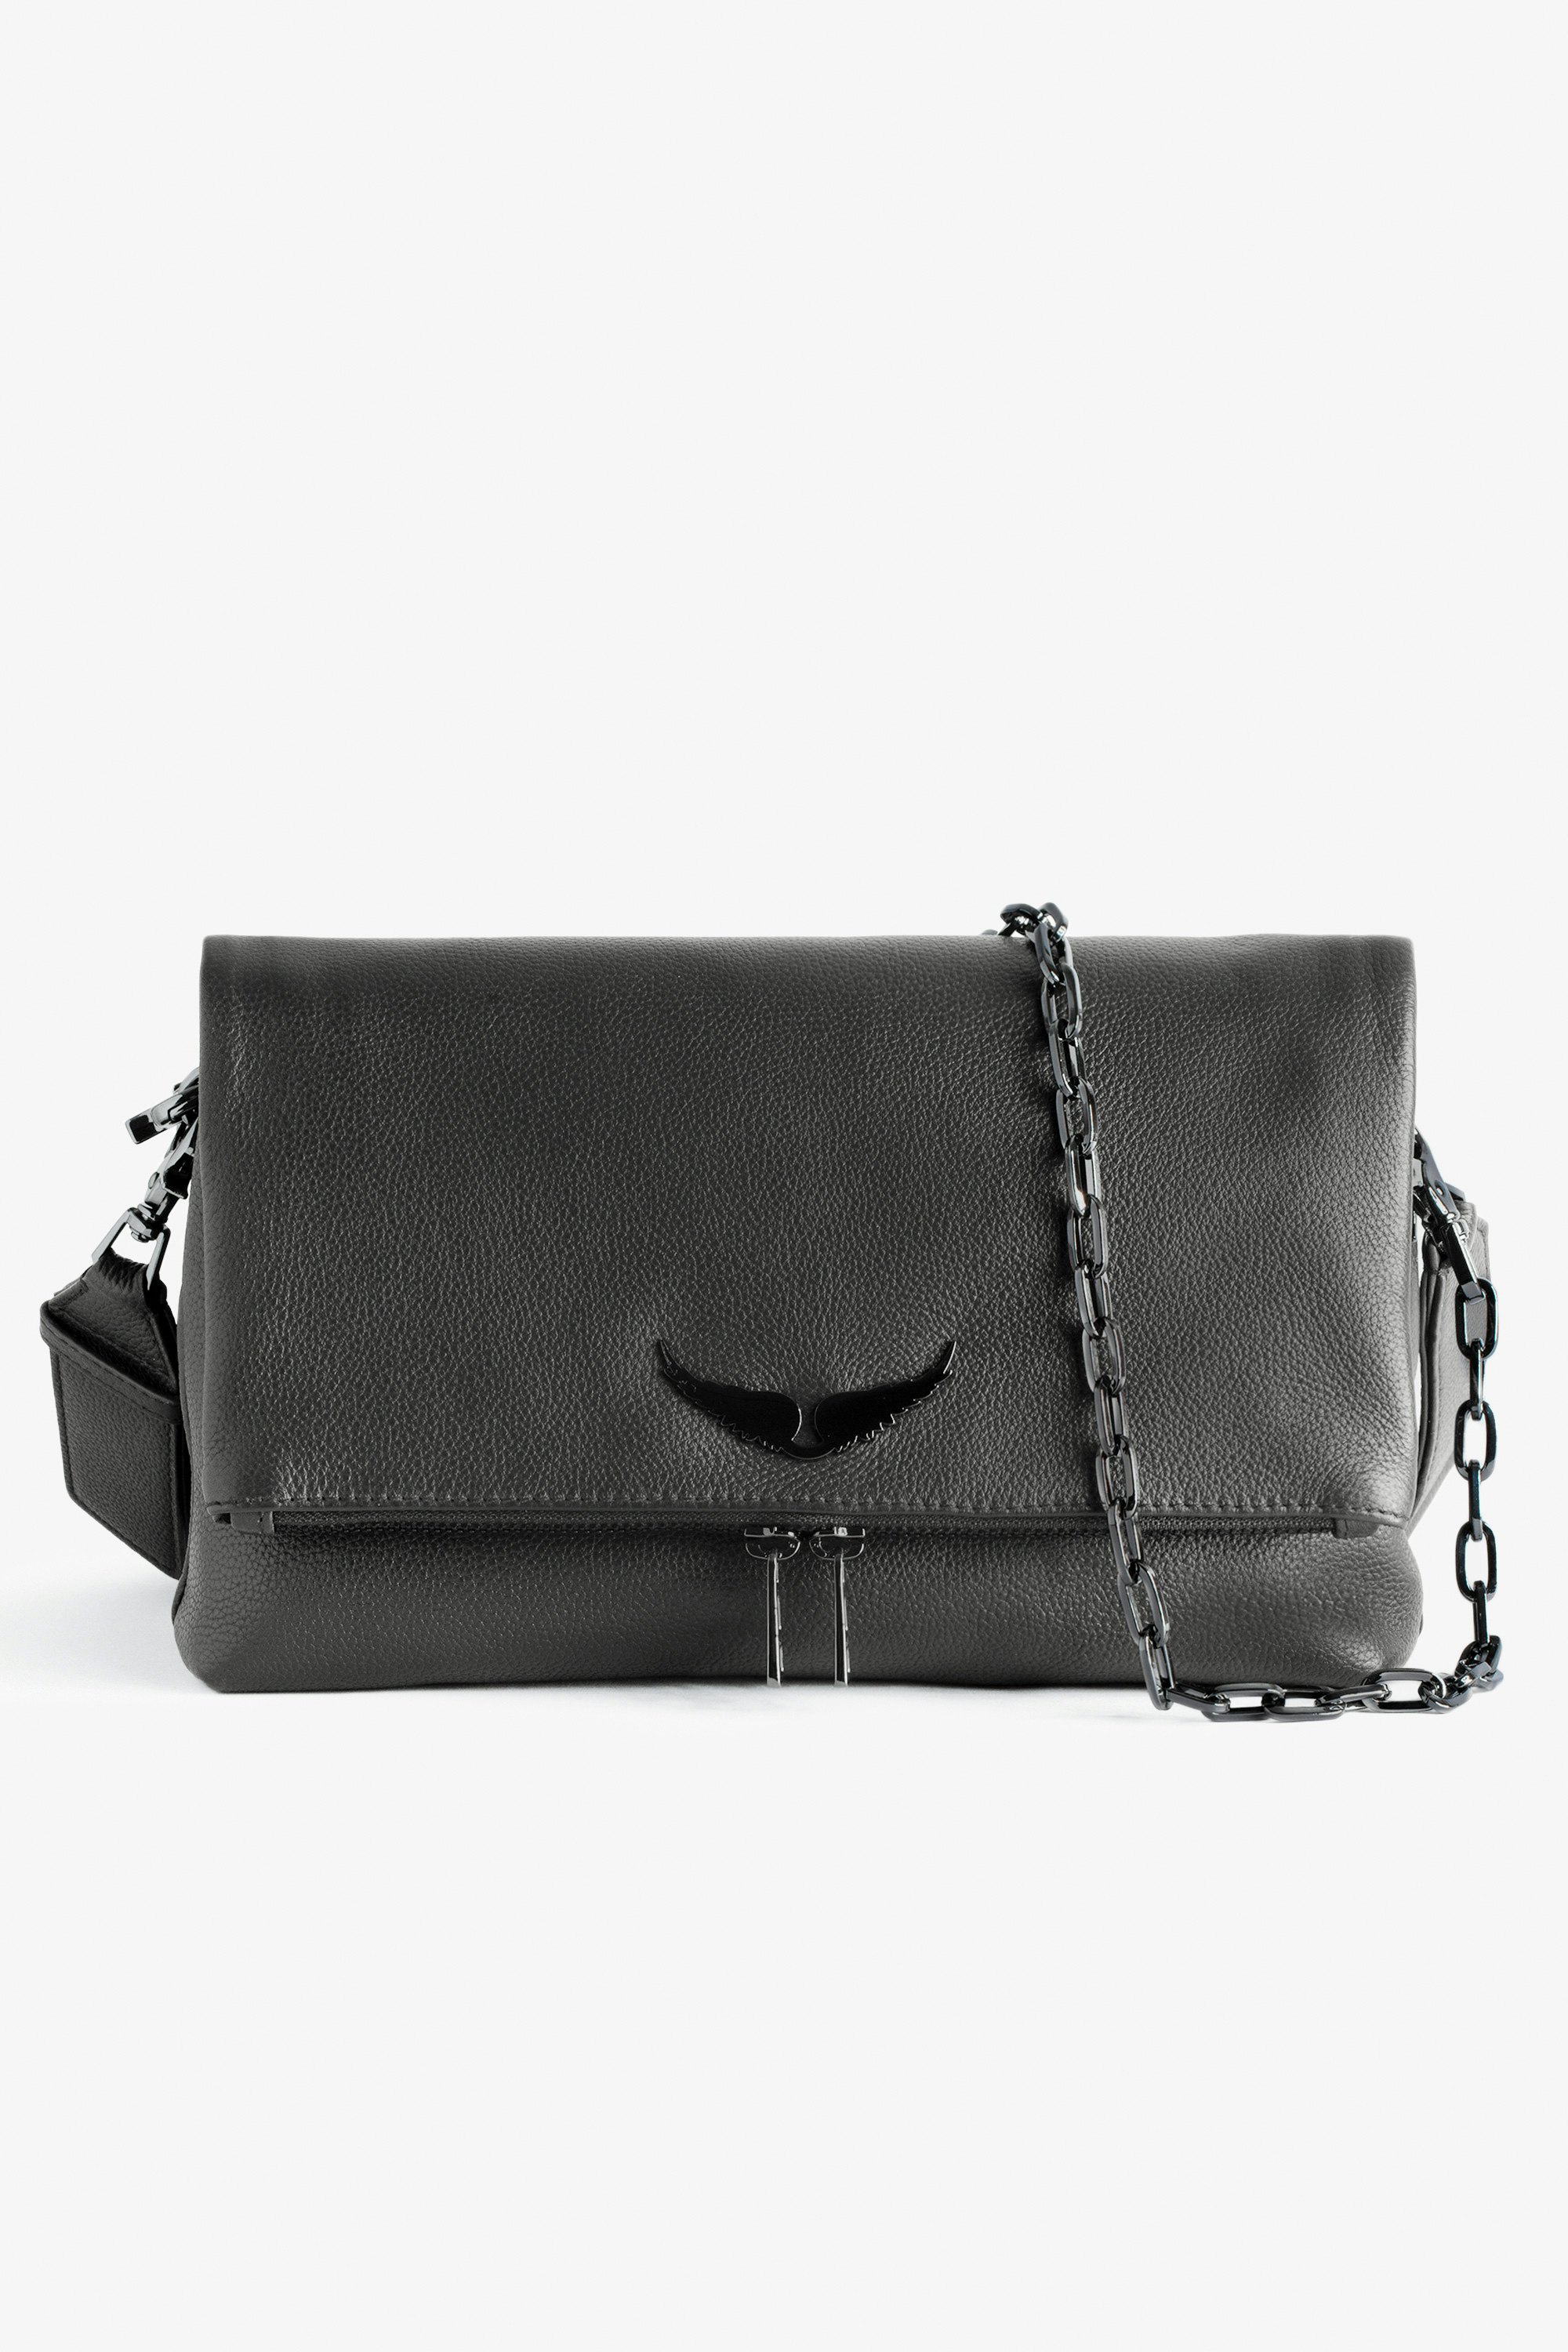 Rocky バッグ - Women’s grey grained leather bag with shoulder strap and wings charm